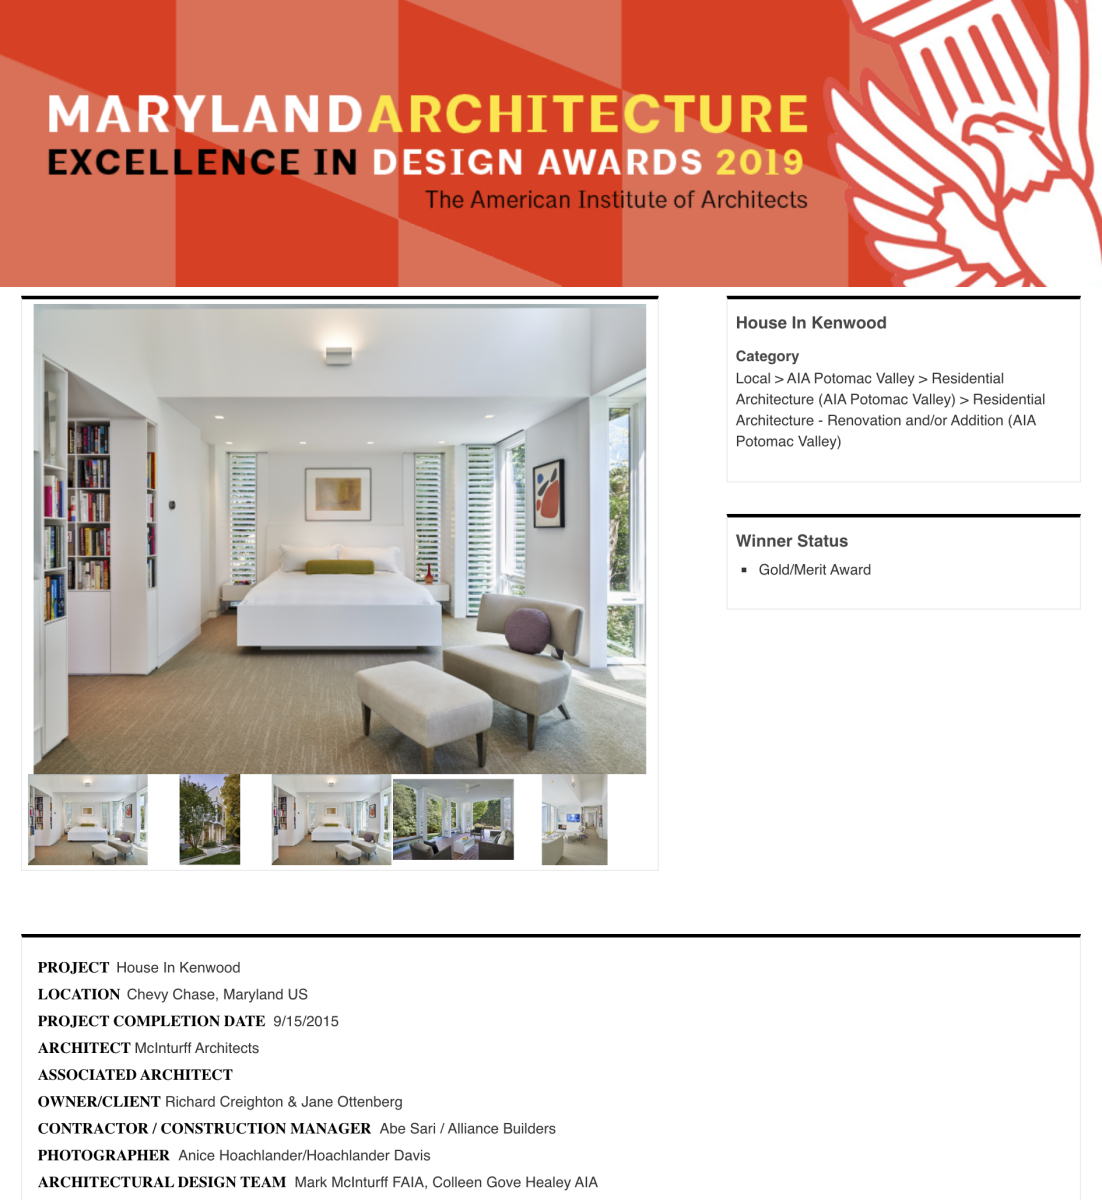 AIA of Potomac Valley 2017 Gold Award of Merit in Residential Architecture to McInturff Architects